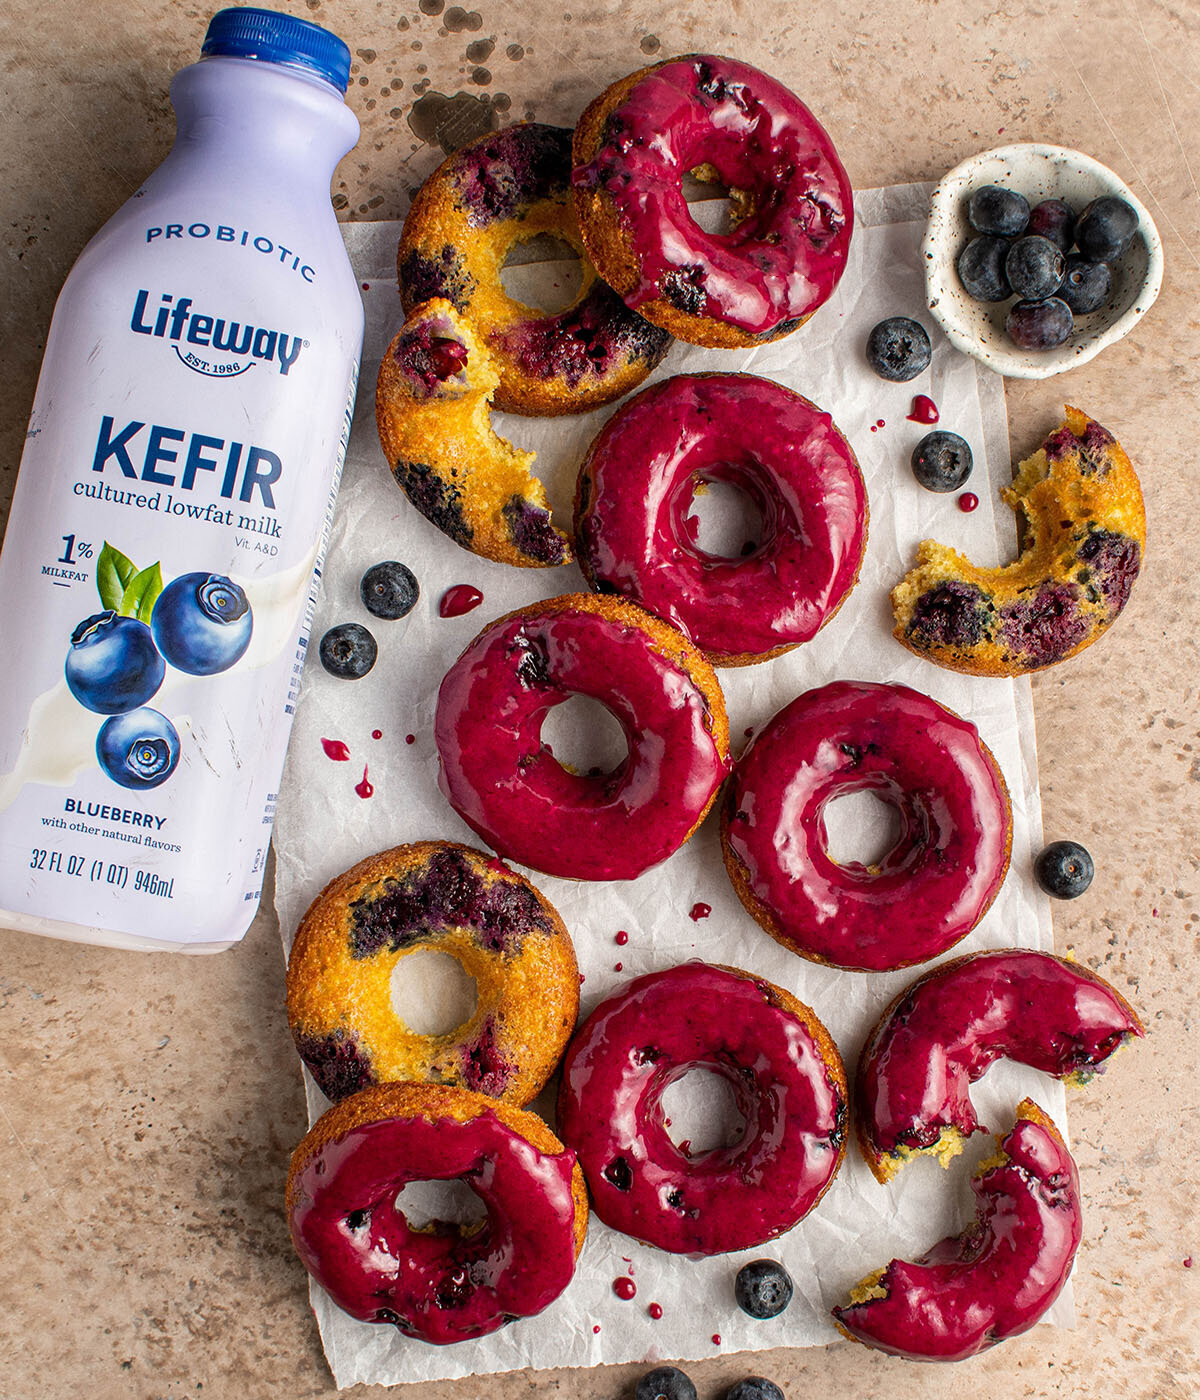 lifeway kefir product shot featuring blueberry donuts